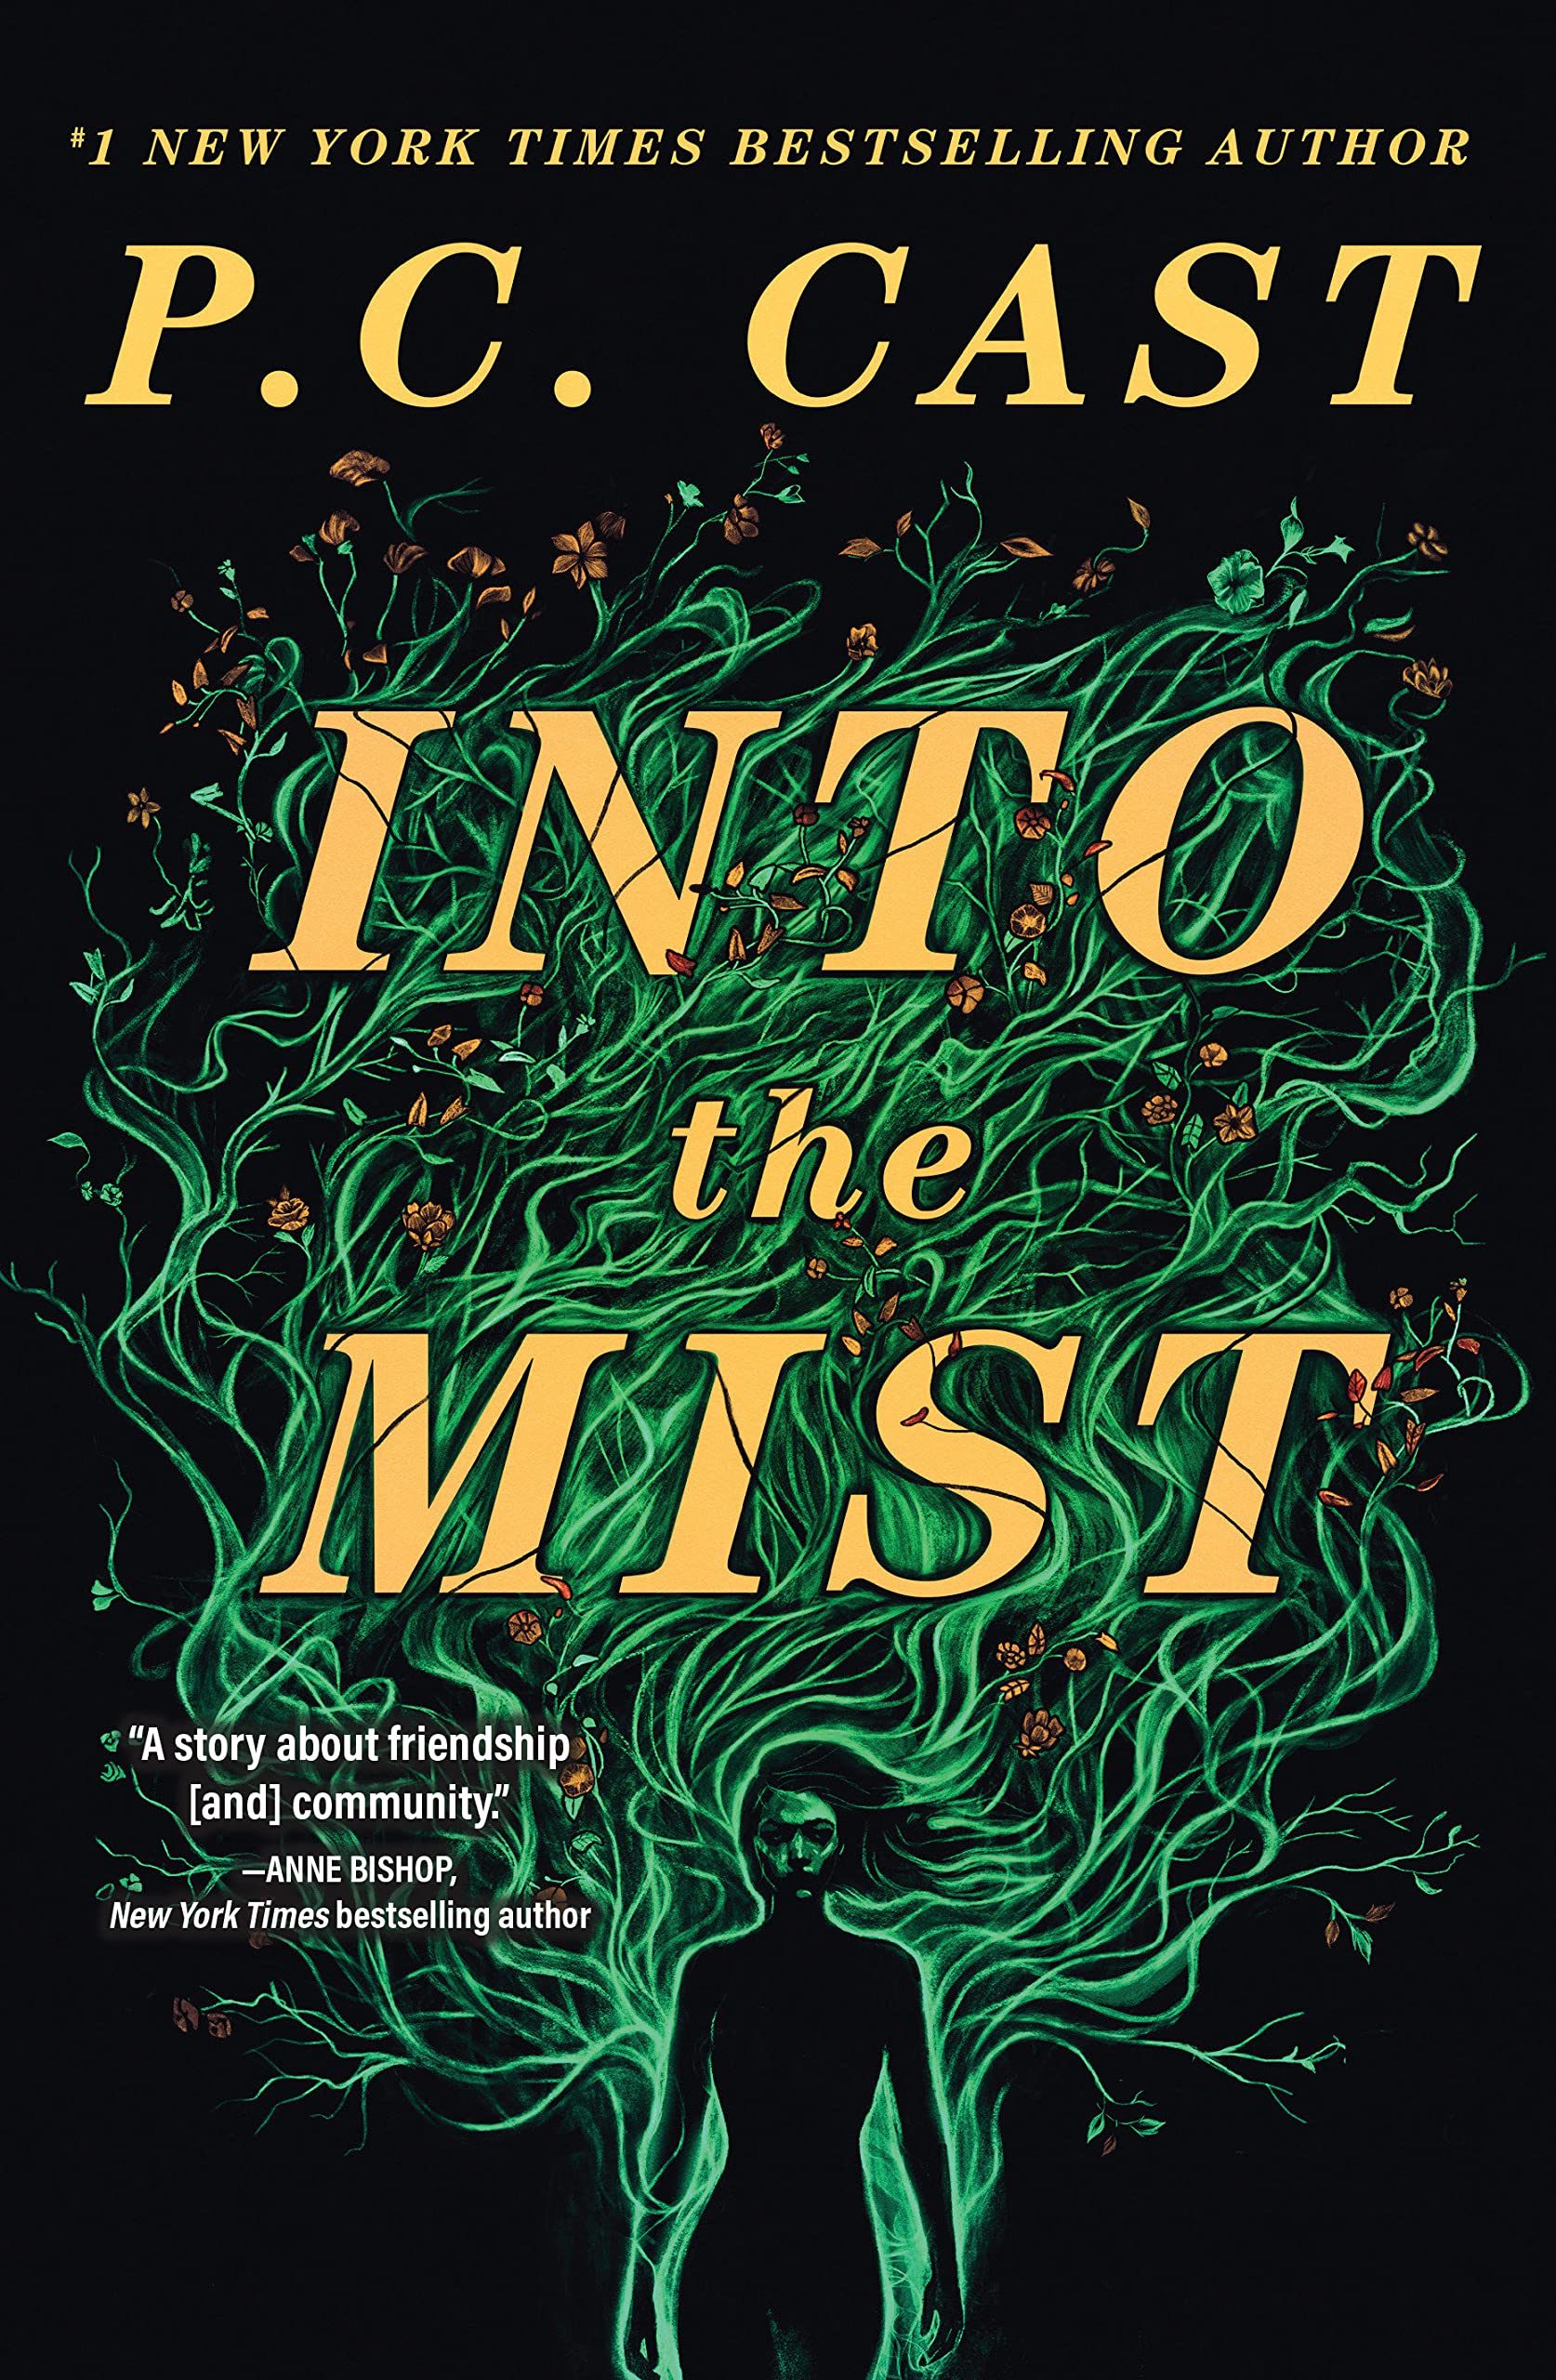 Into the Mist (Into the Mist #1)